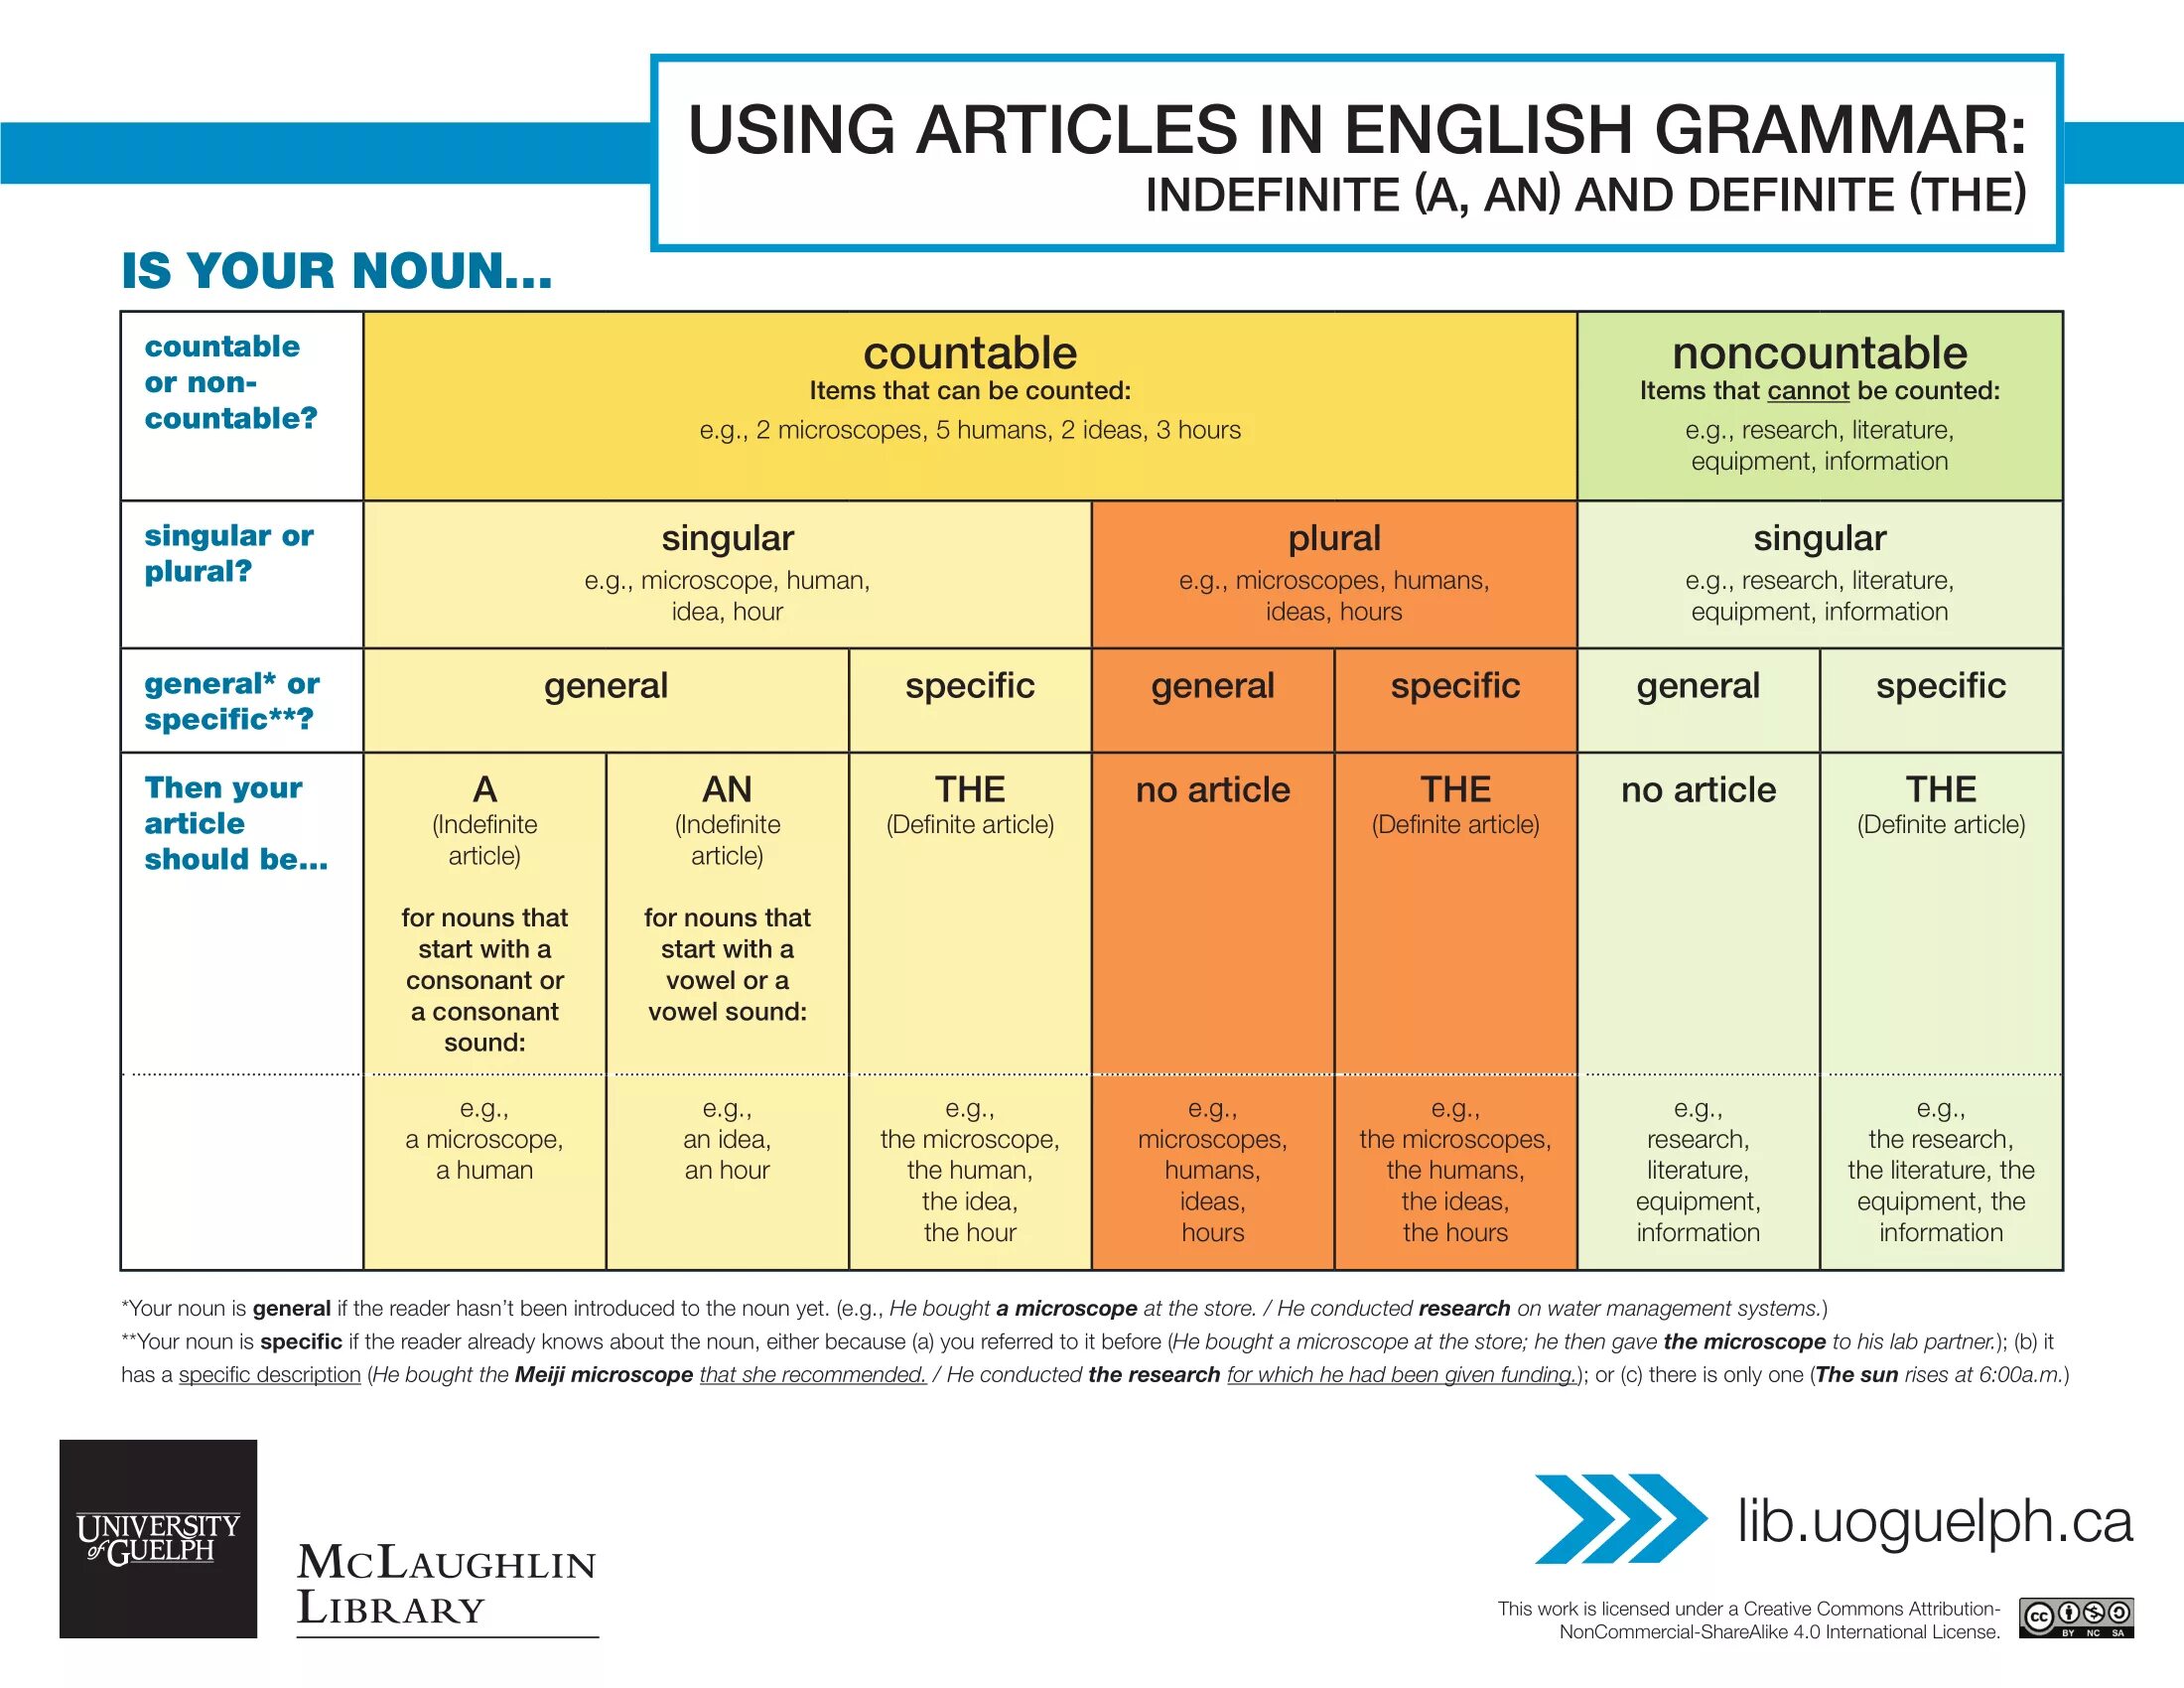 Articles English Grammar. Use of articles in English. Articles in English правила. Indefinite and definite articles (неопр. И опр. Артикли). Detailed articles